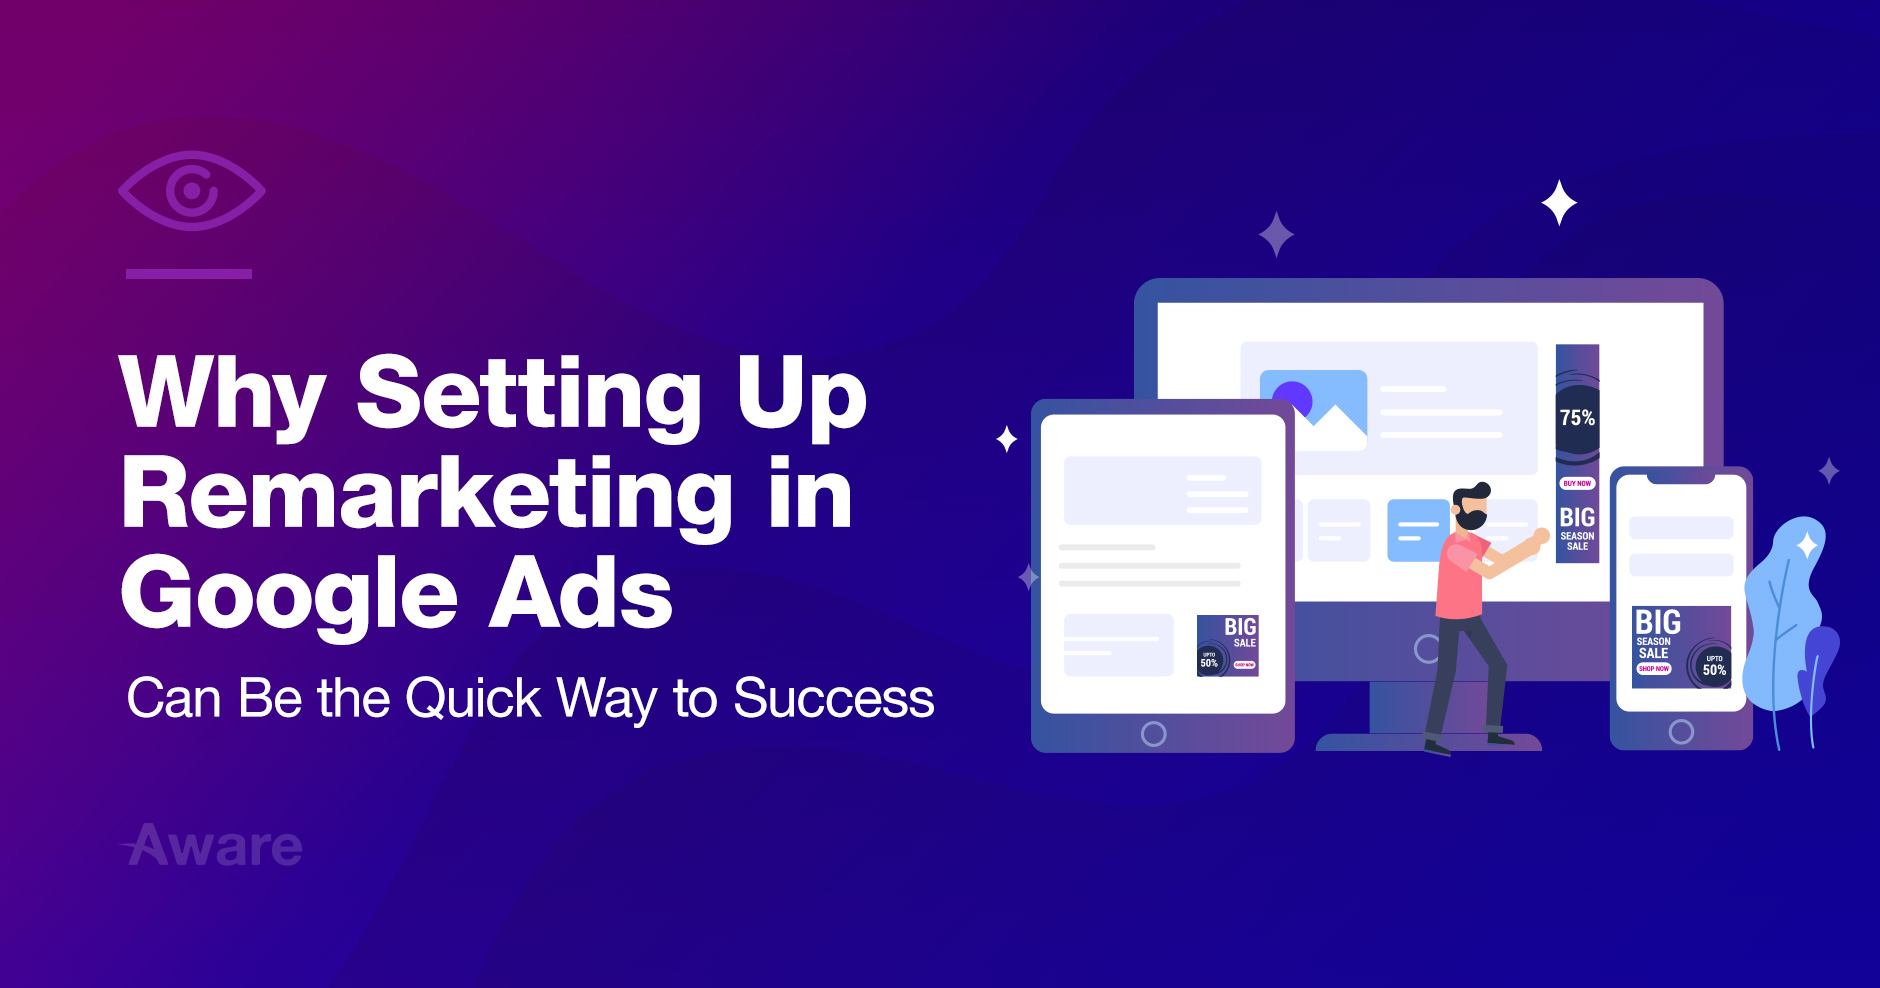 Why Setting Up Remarketing in Google Ads Can Be the Quick Way to Success